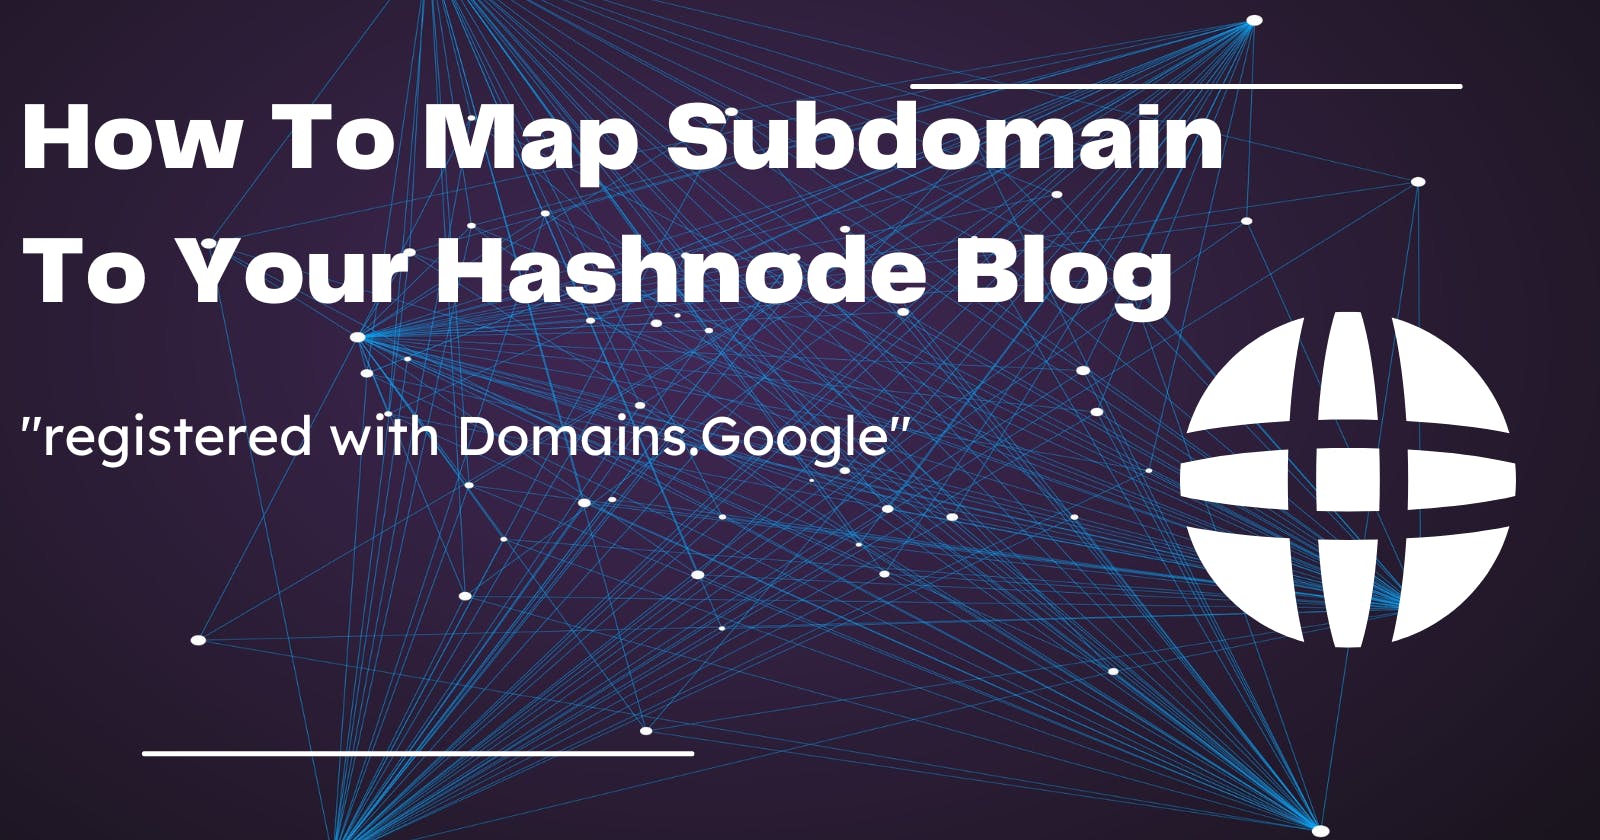 How To Map Subdomain [registered with Domains.Google] To Your Hashnode Blog